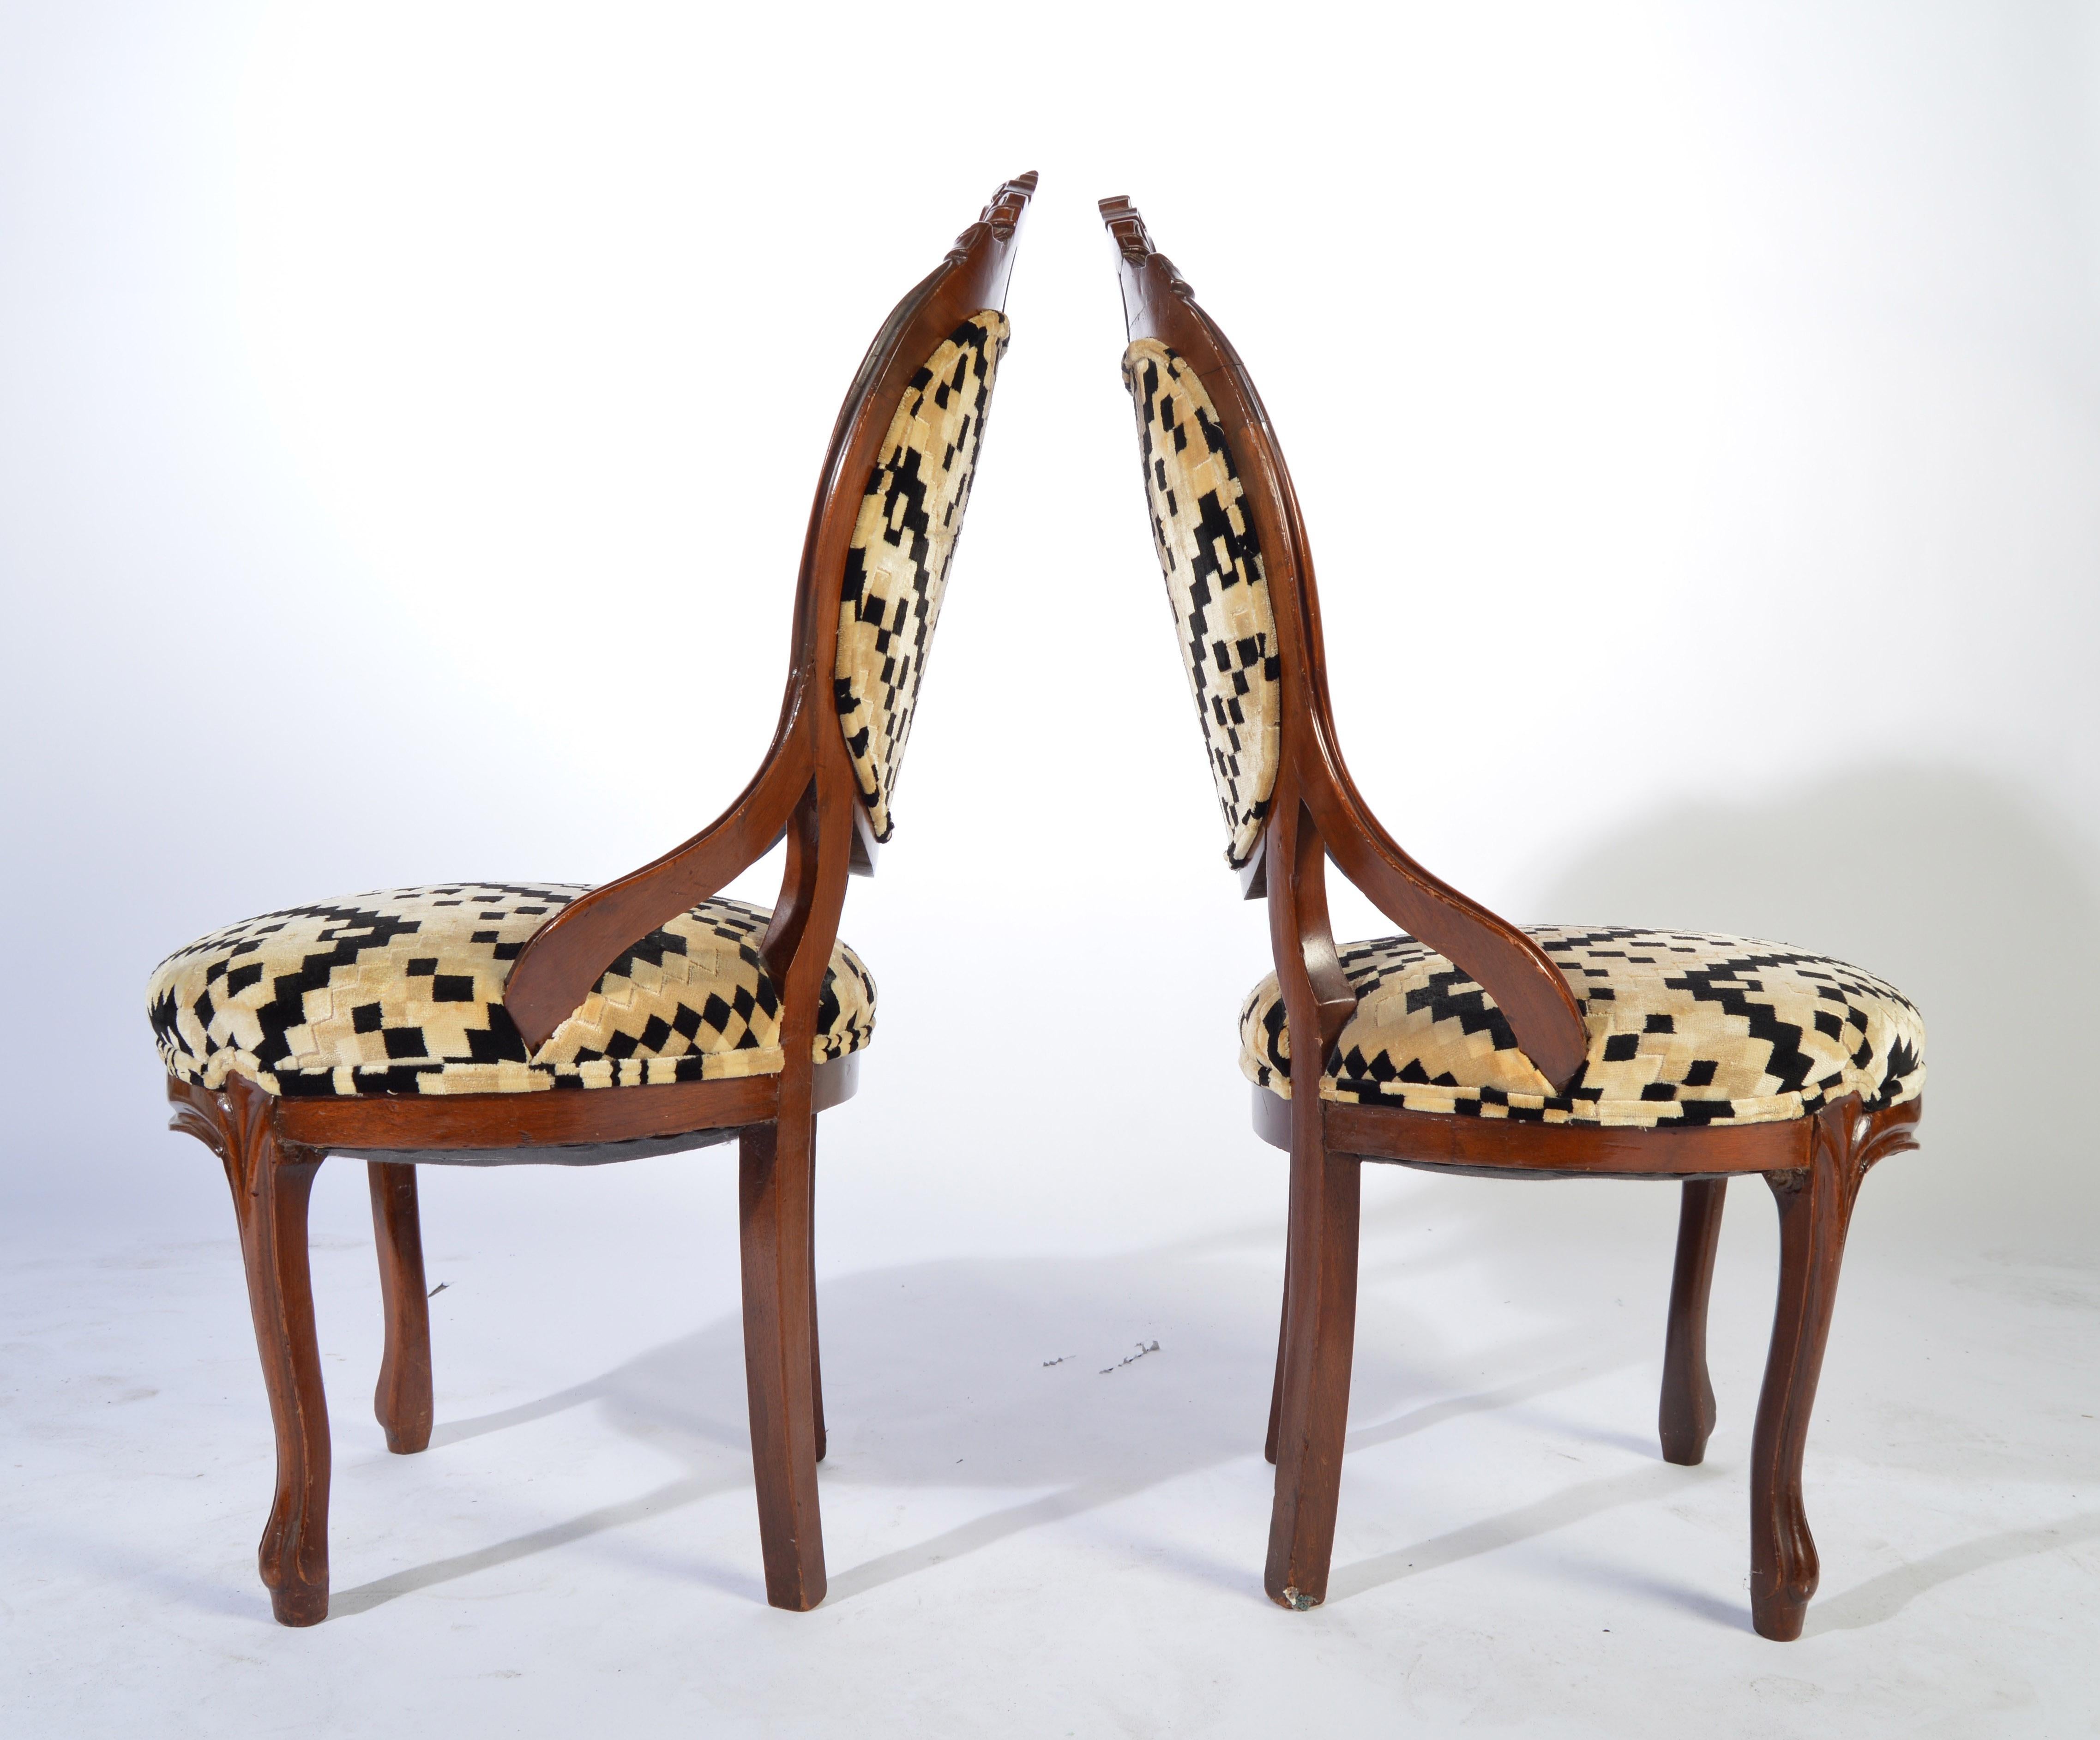 American Victorian Parlor Chairs Having Carved Mahogany Frames with Art Deco Upholstery